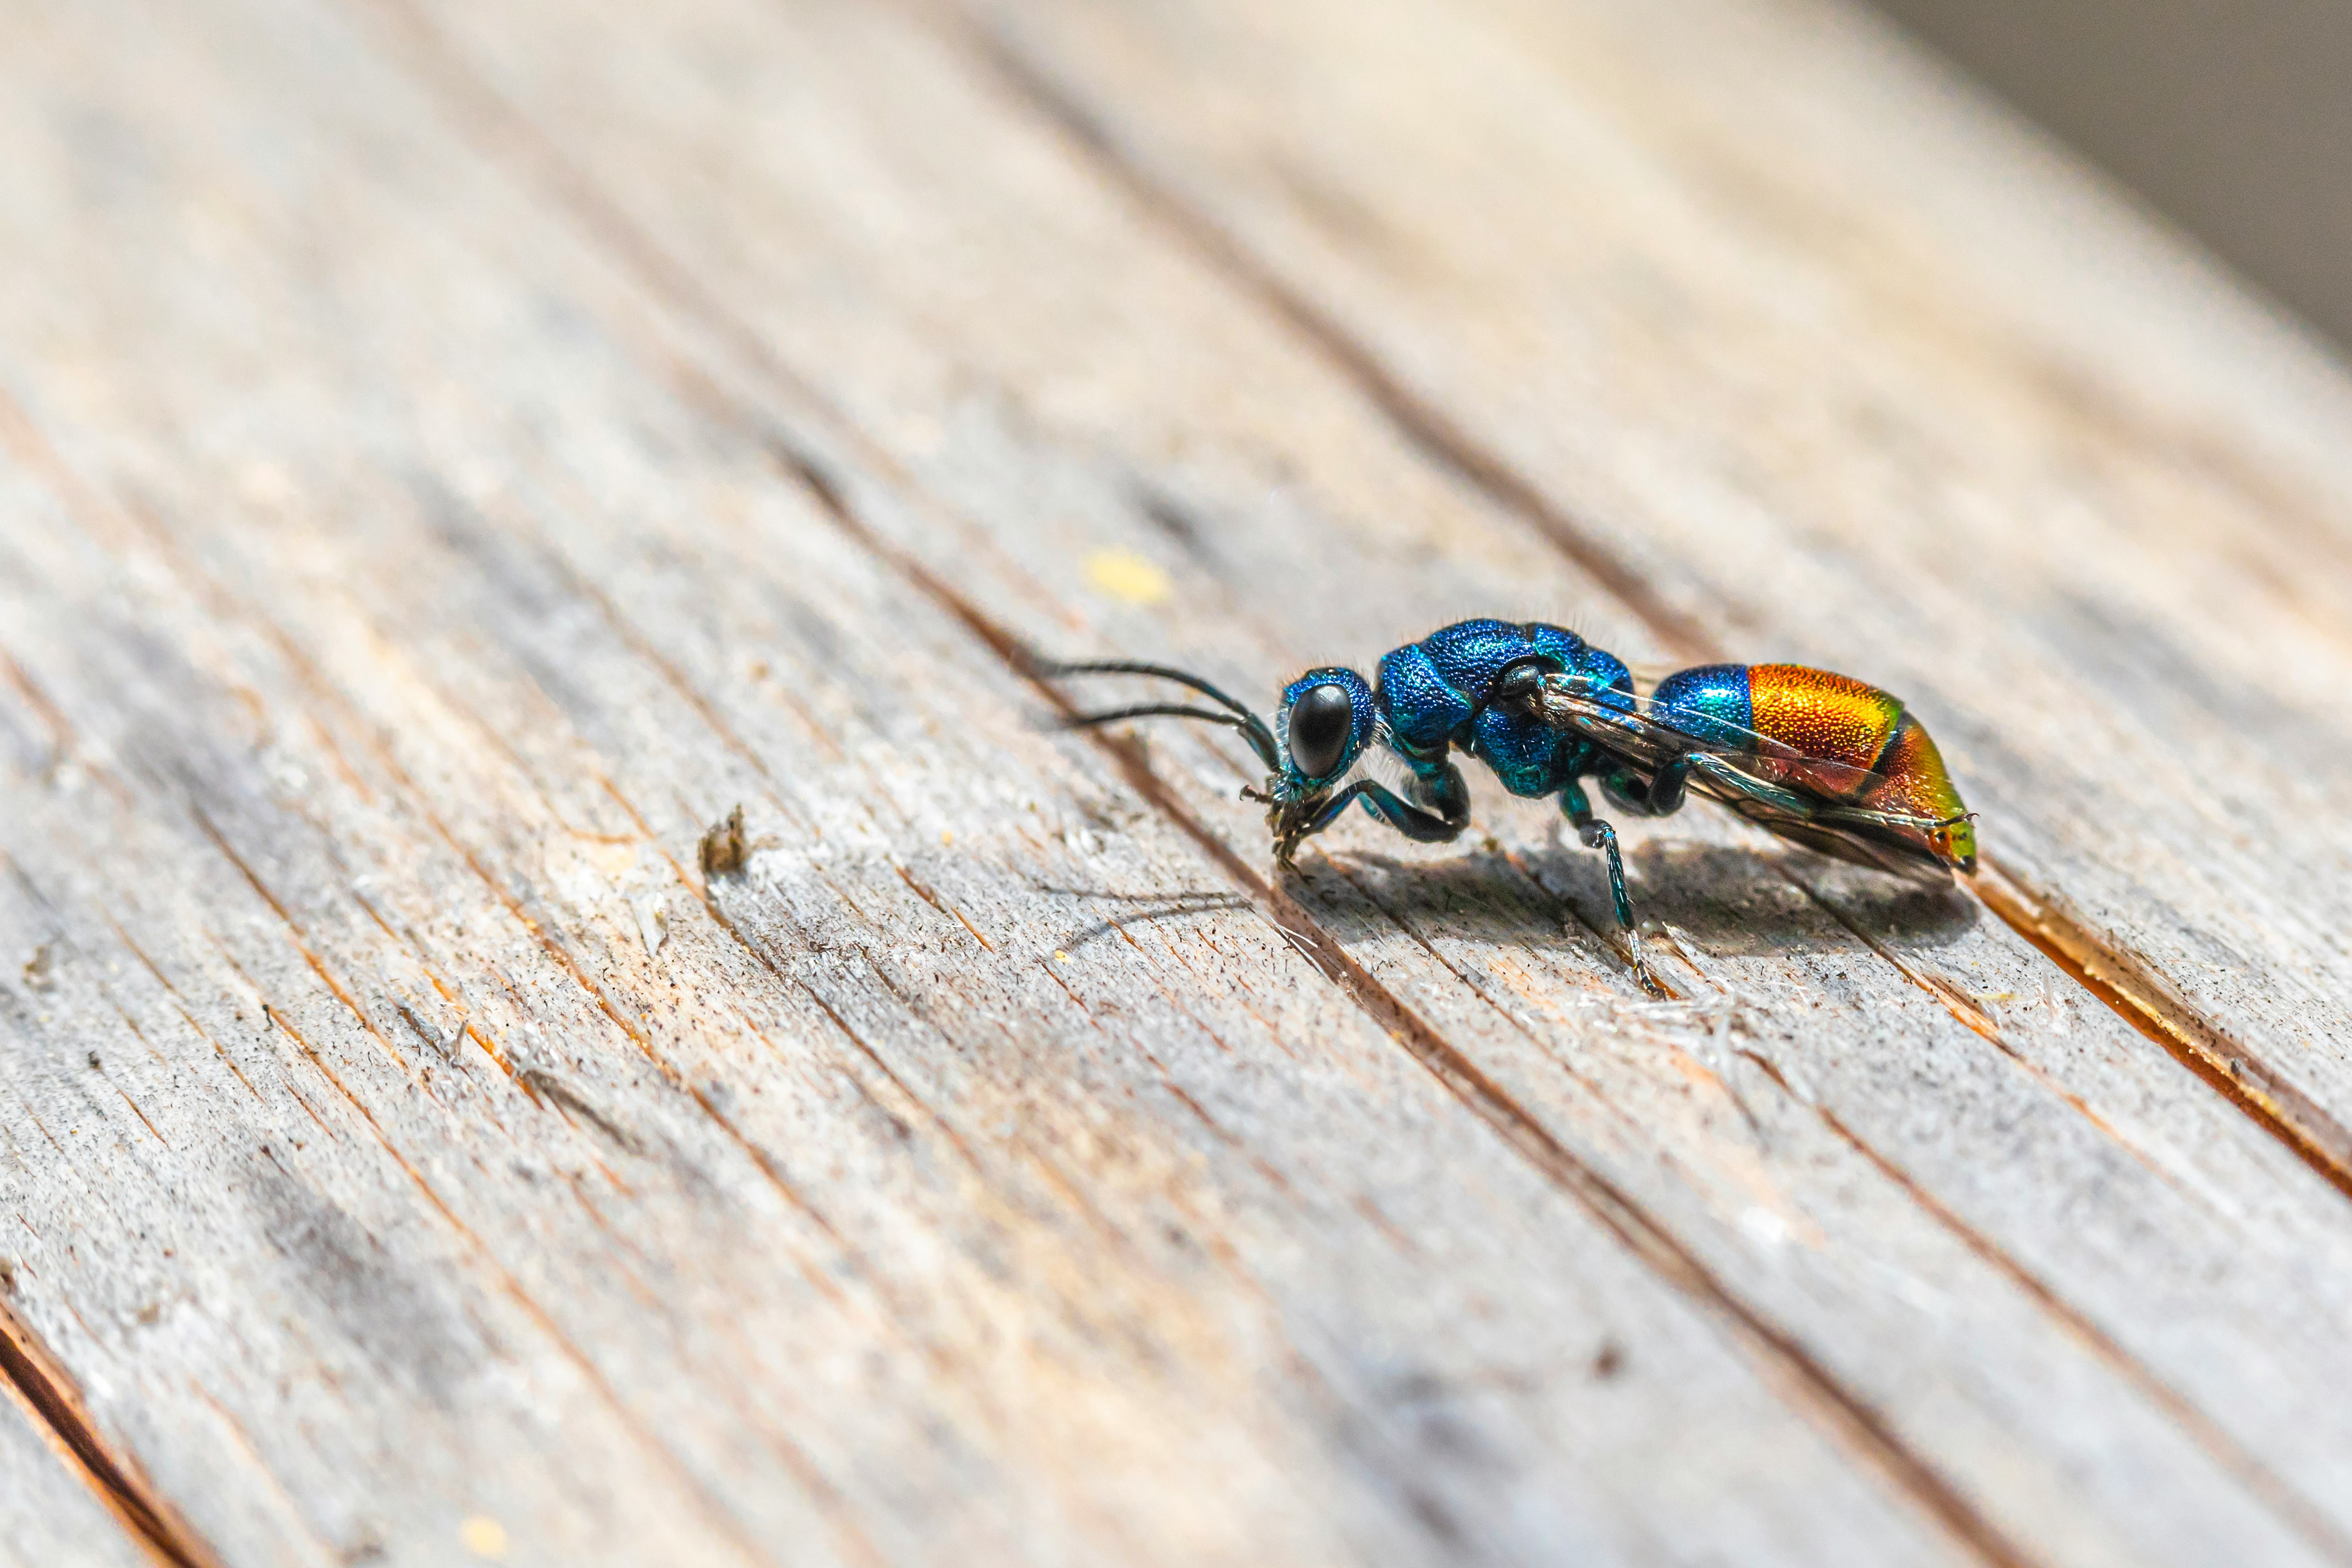 blue and black insect on brown wooden surface